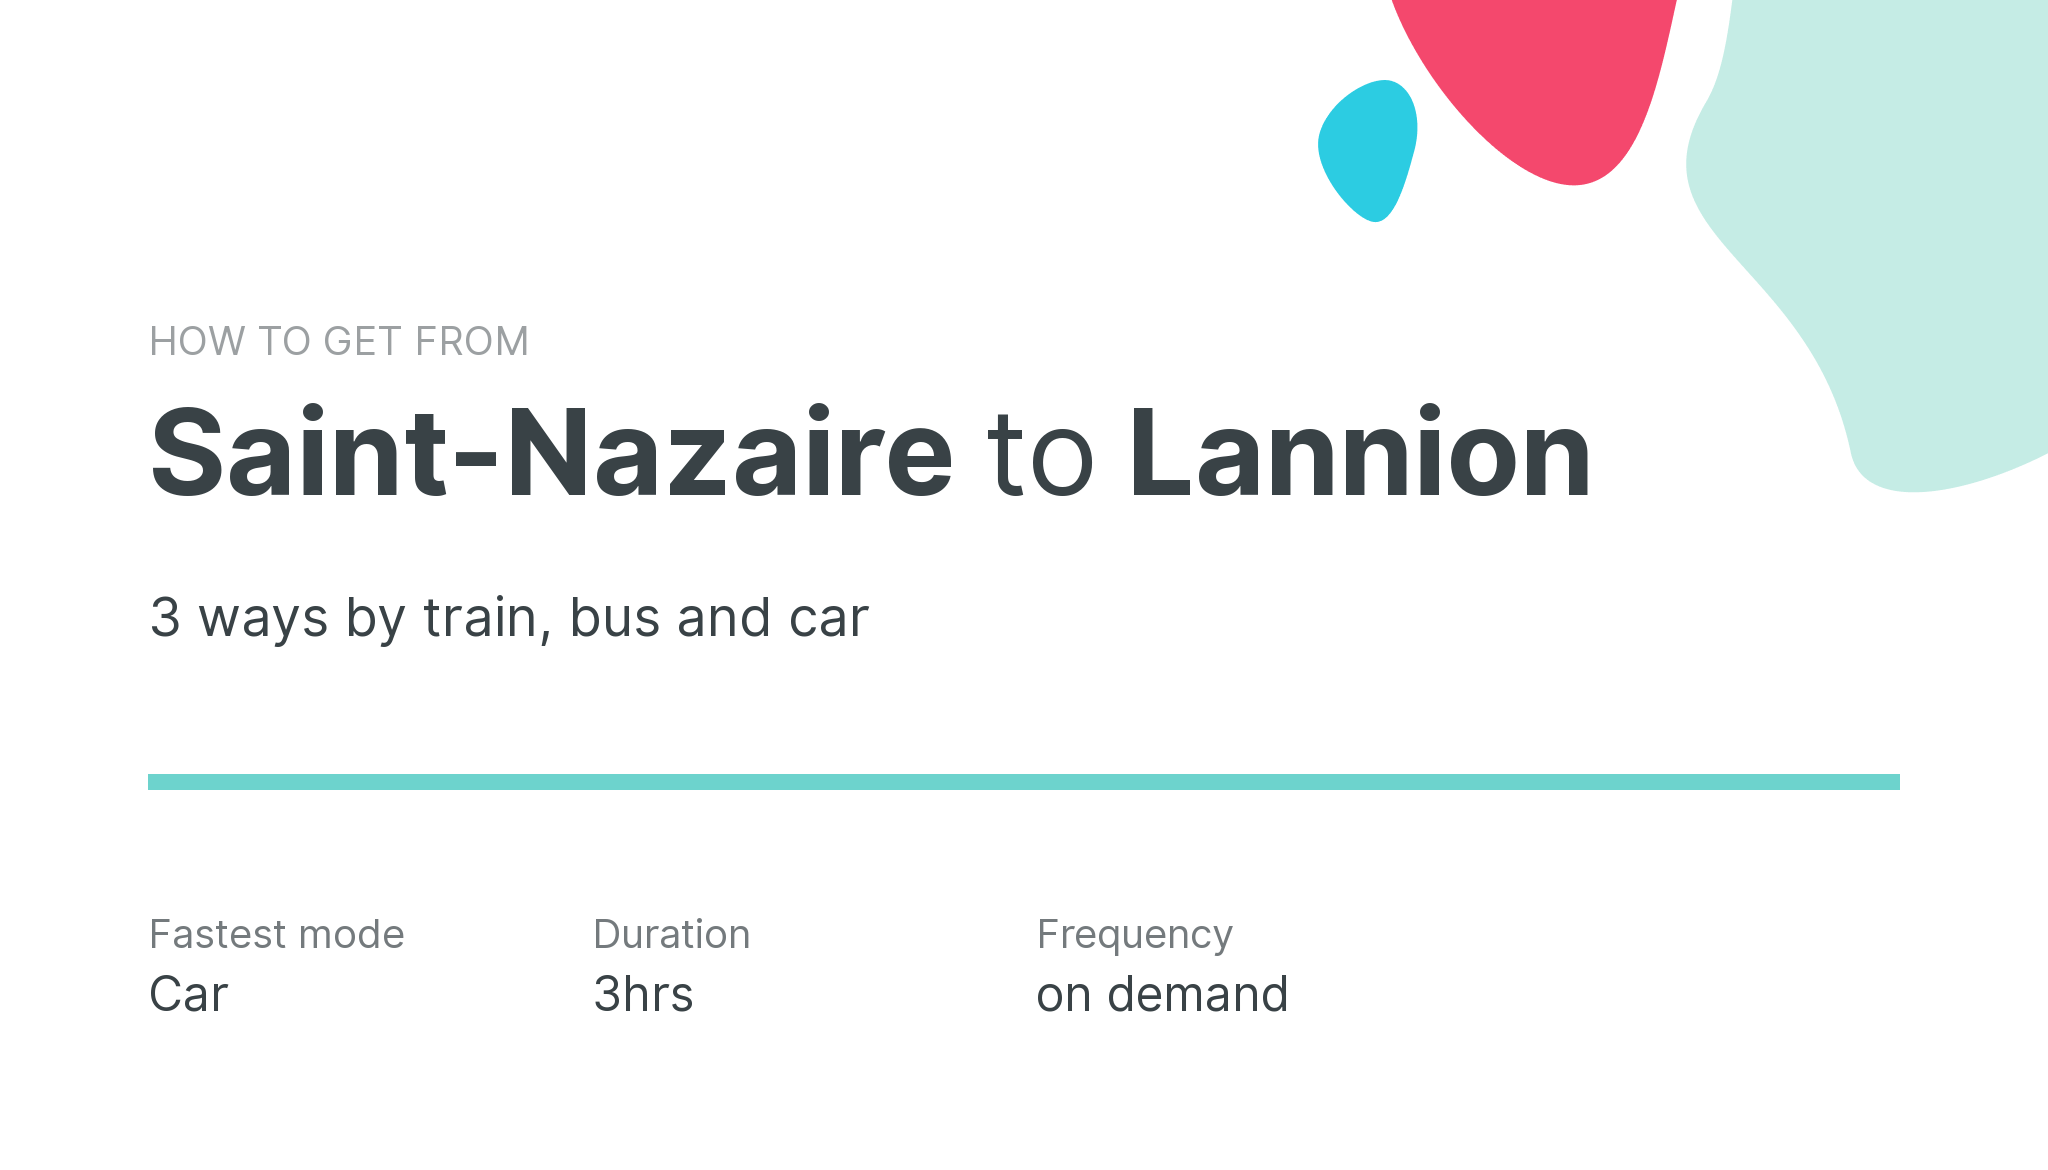 How do I get from Saint-Nazaire to Lannion